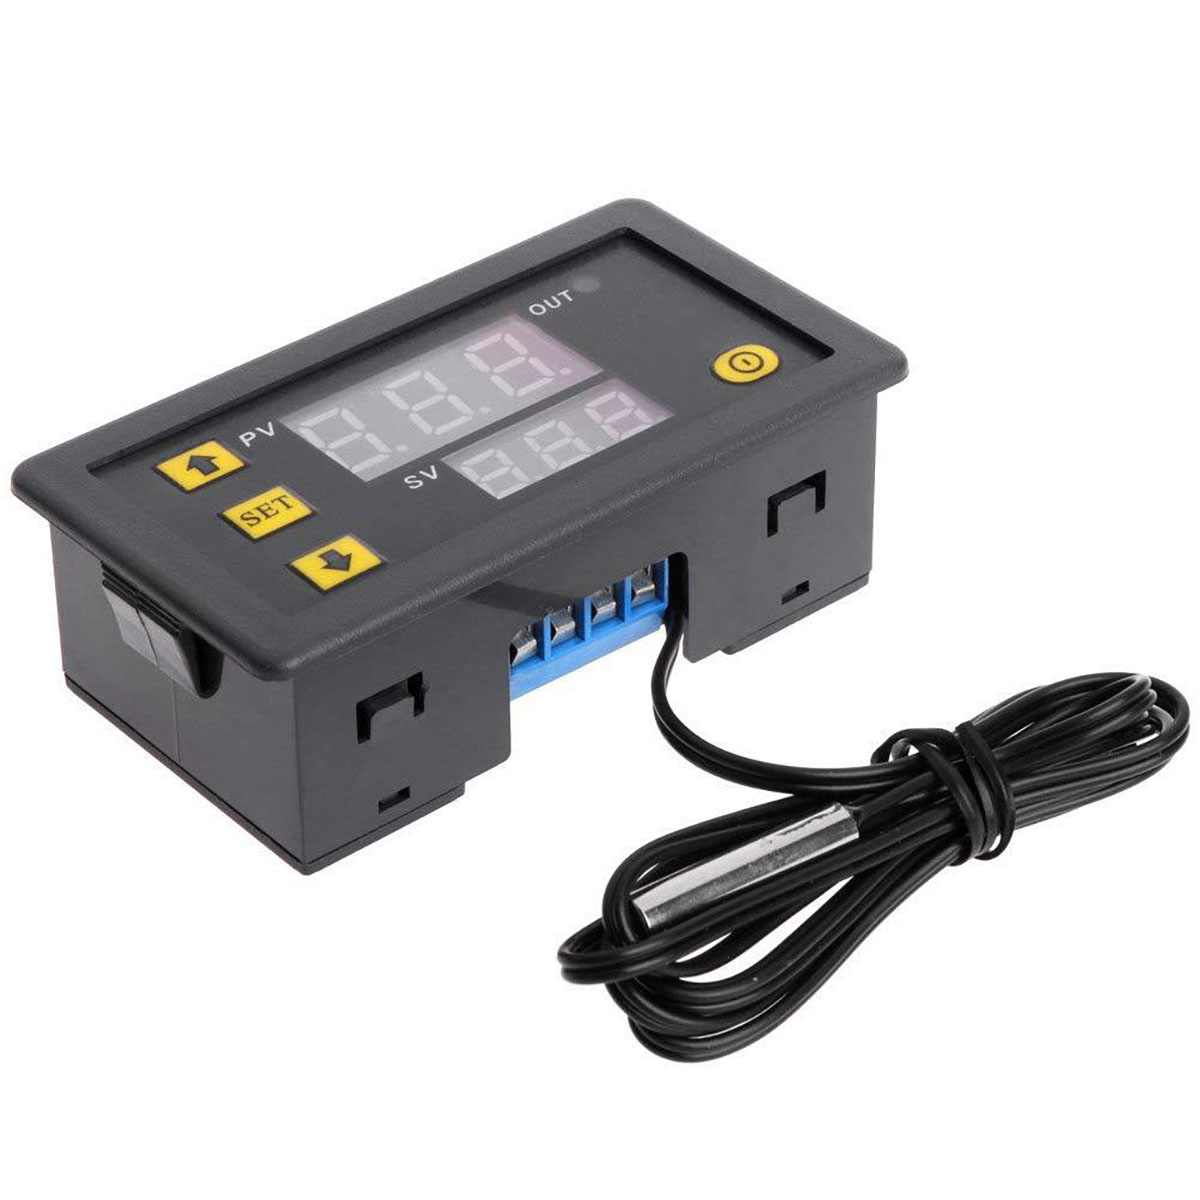 W3230 Digital Temperature Controller AC 110 220V DC 12V 24V 20A Thermostat With Heating Cooling Control Instrument LED Display